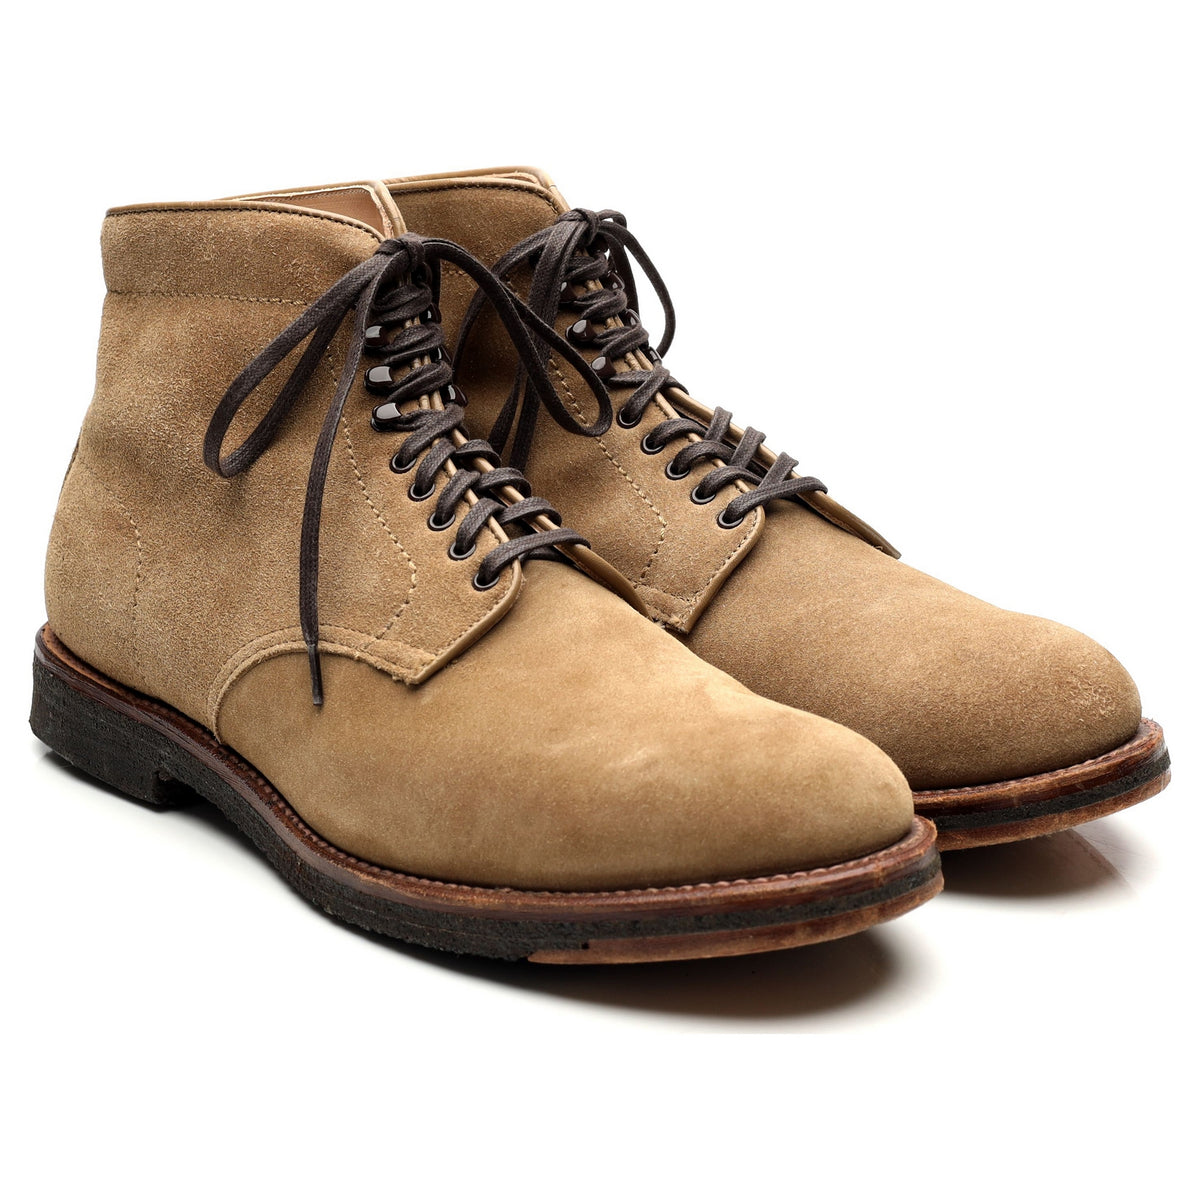 &#39;46050H &#39; Sand Brown Suede Boots UK 10.5 US 11